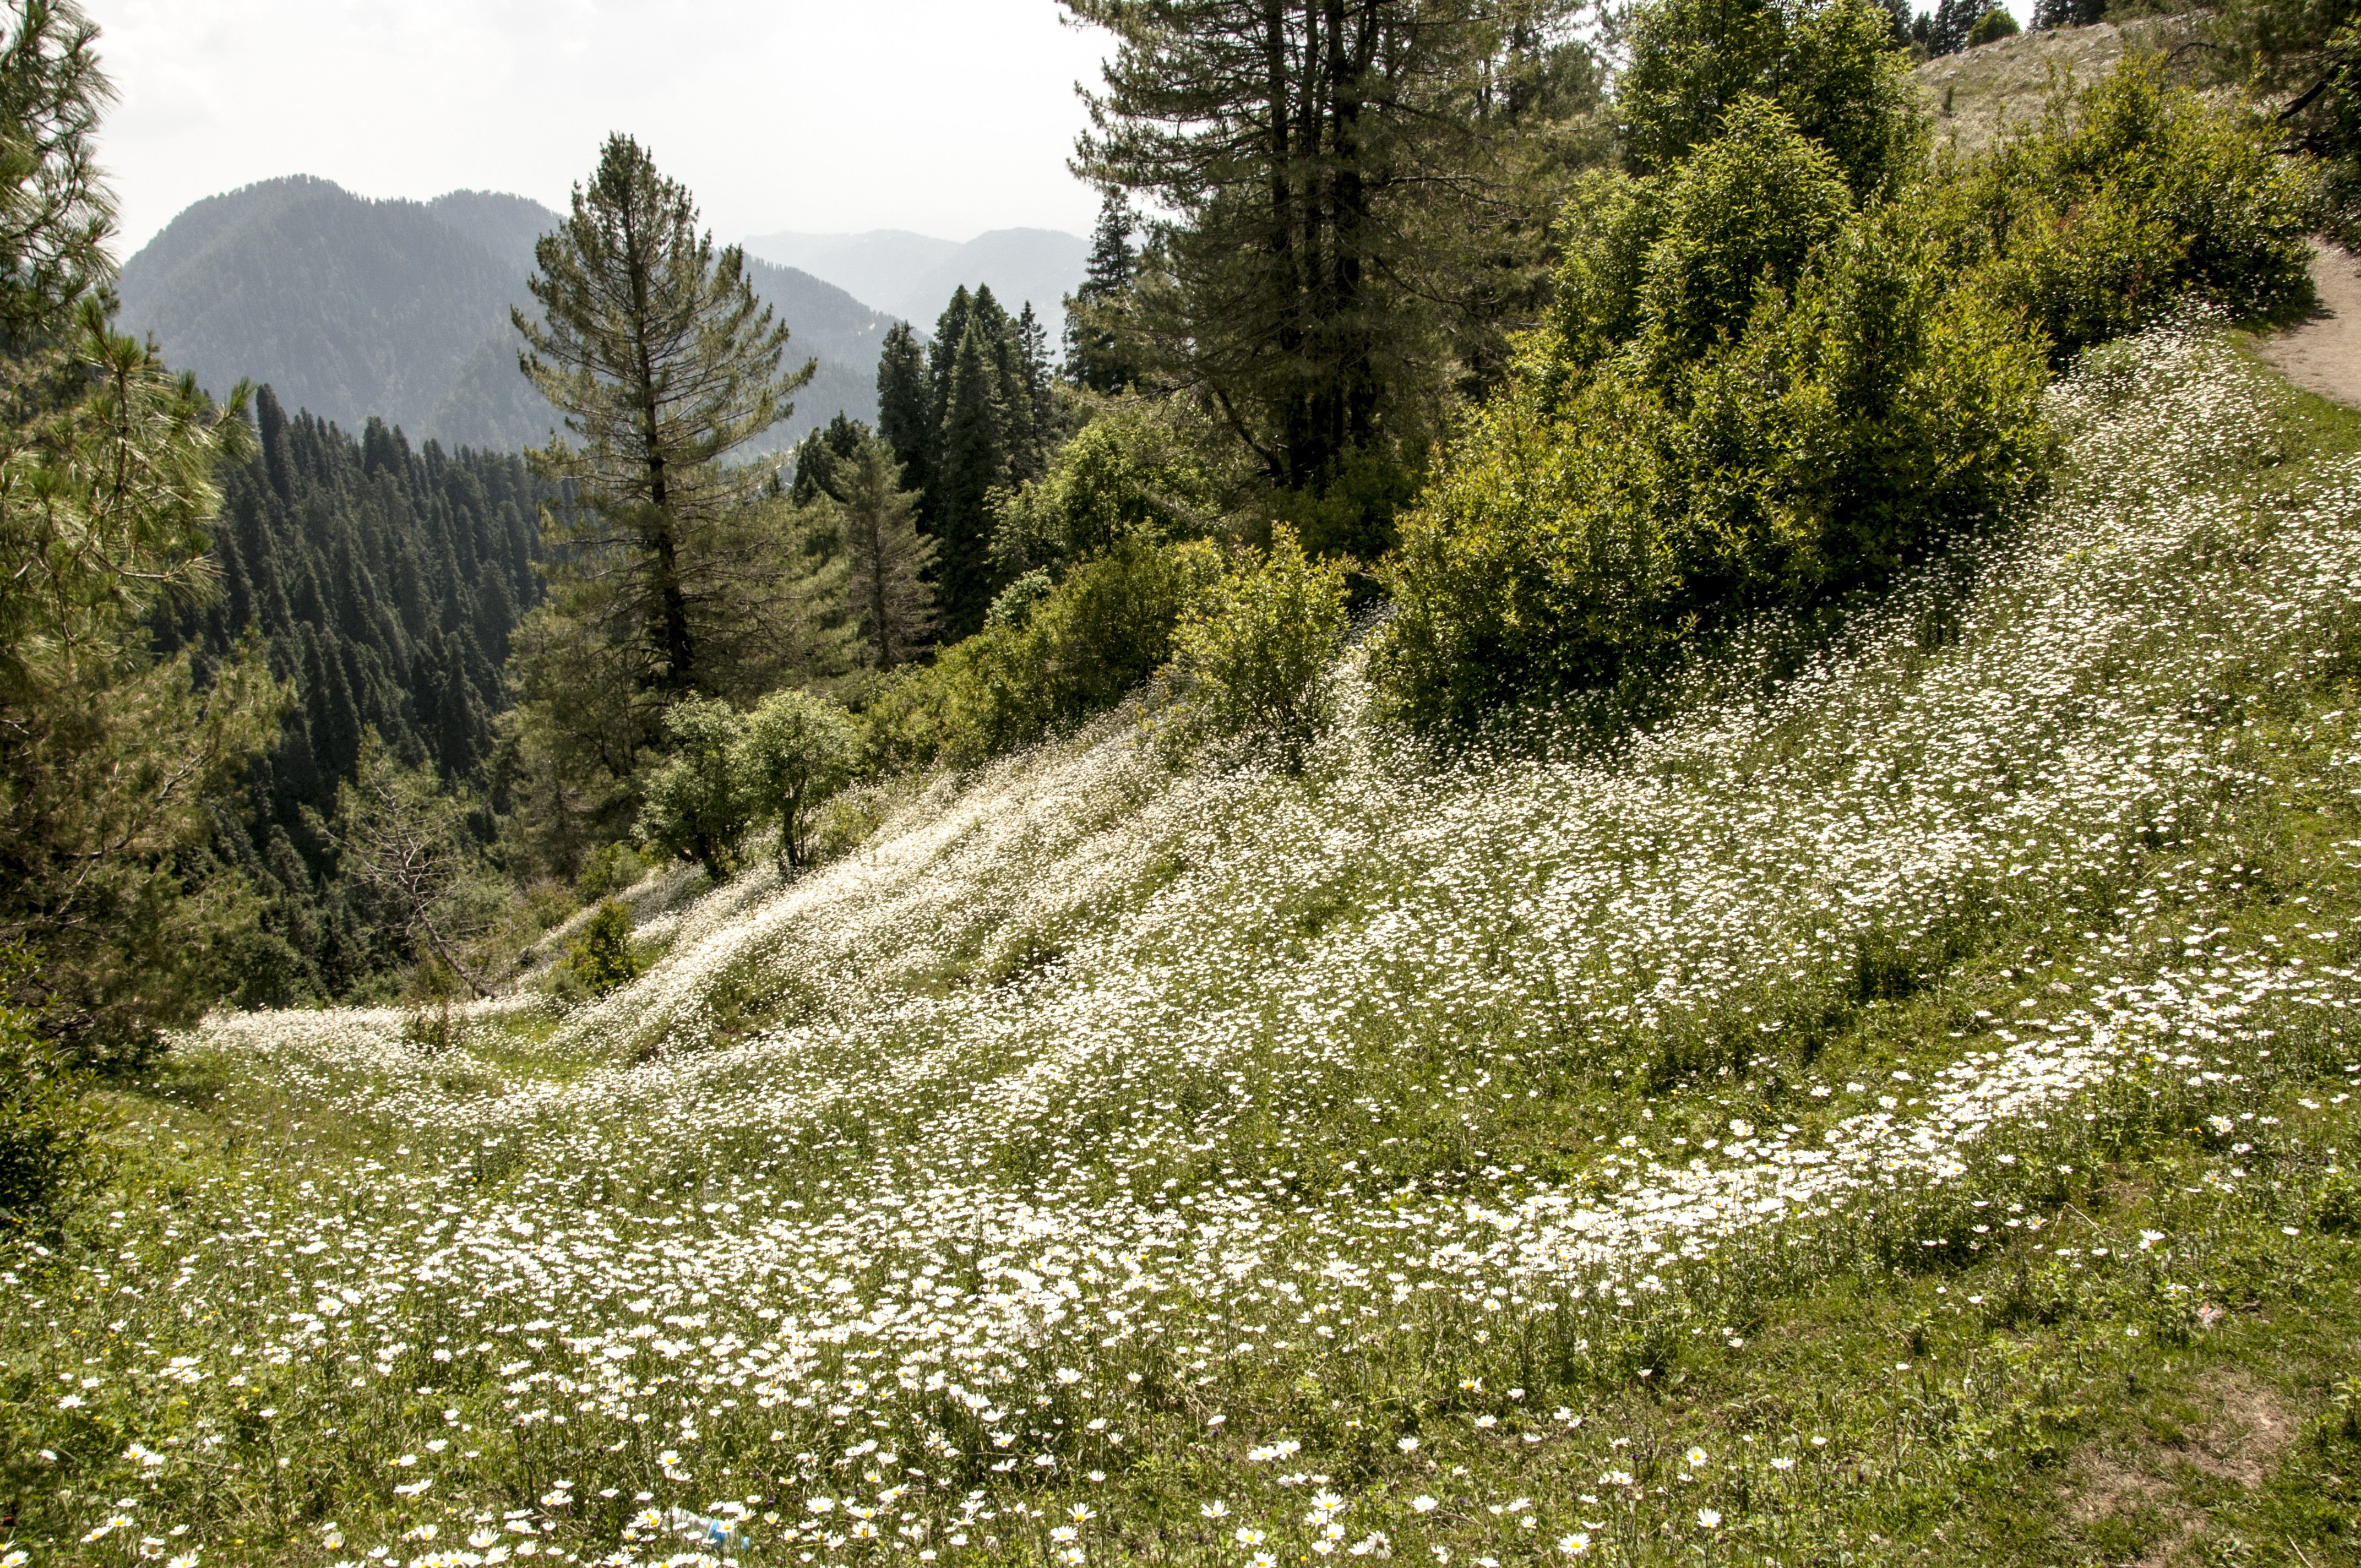 The scenic beauty of Ayubia with the ground covered with white flowers